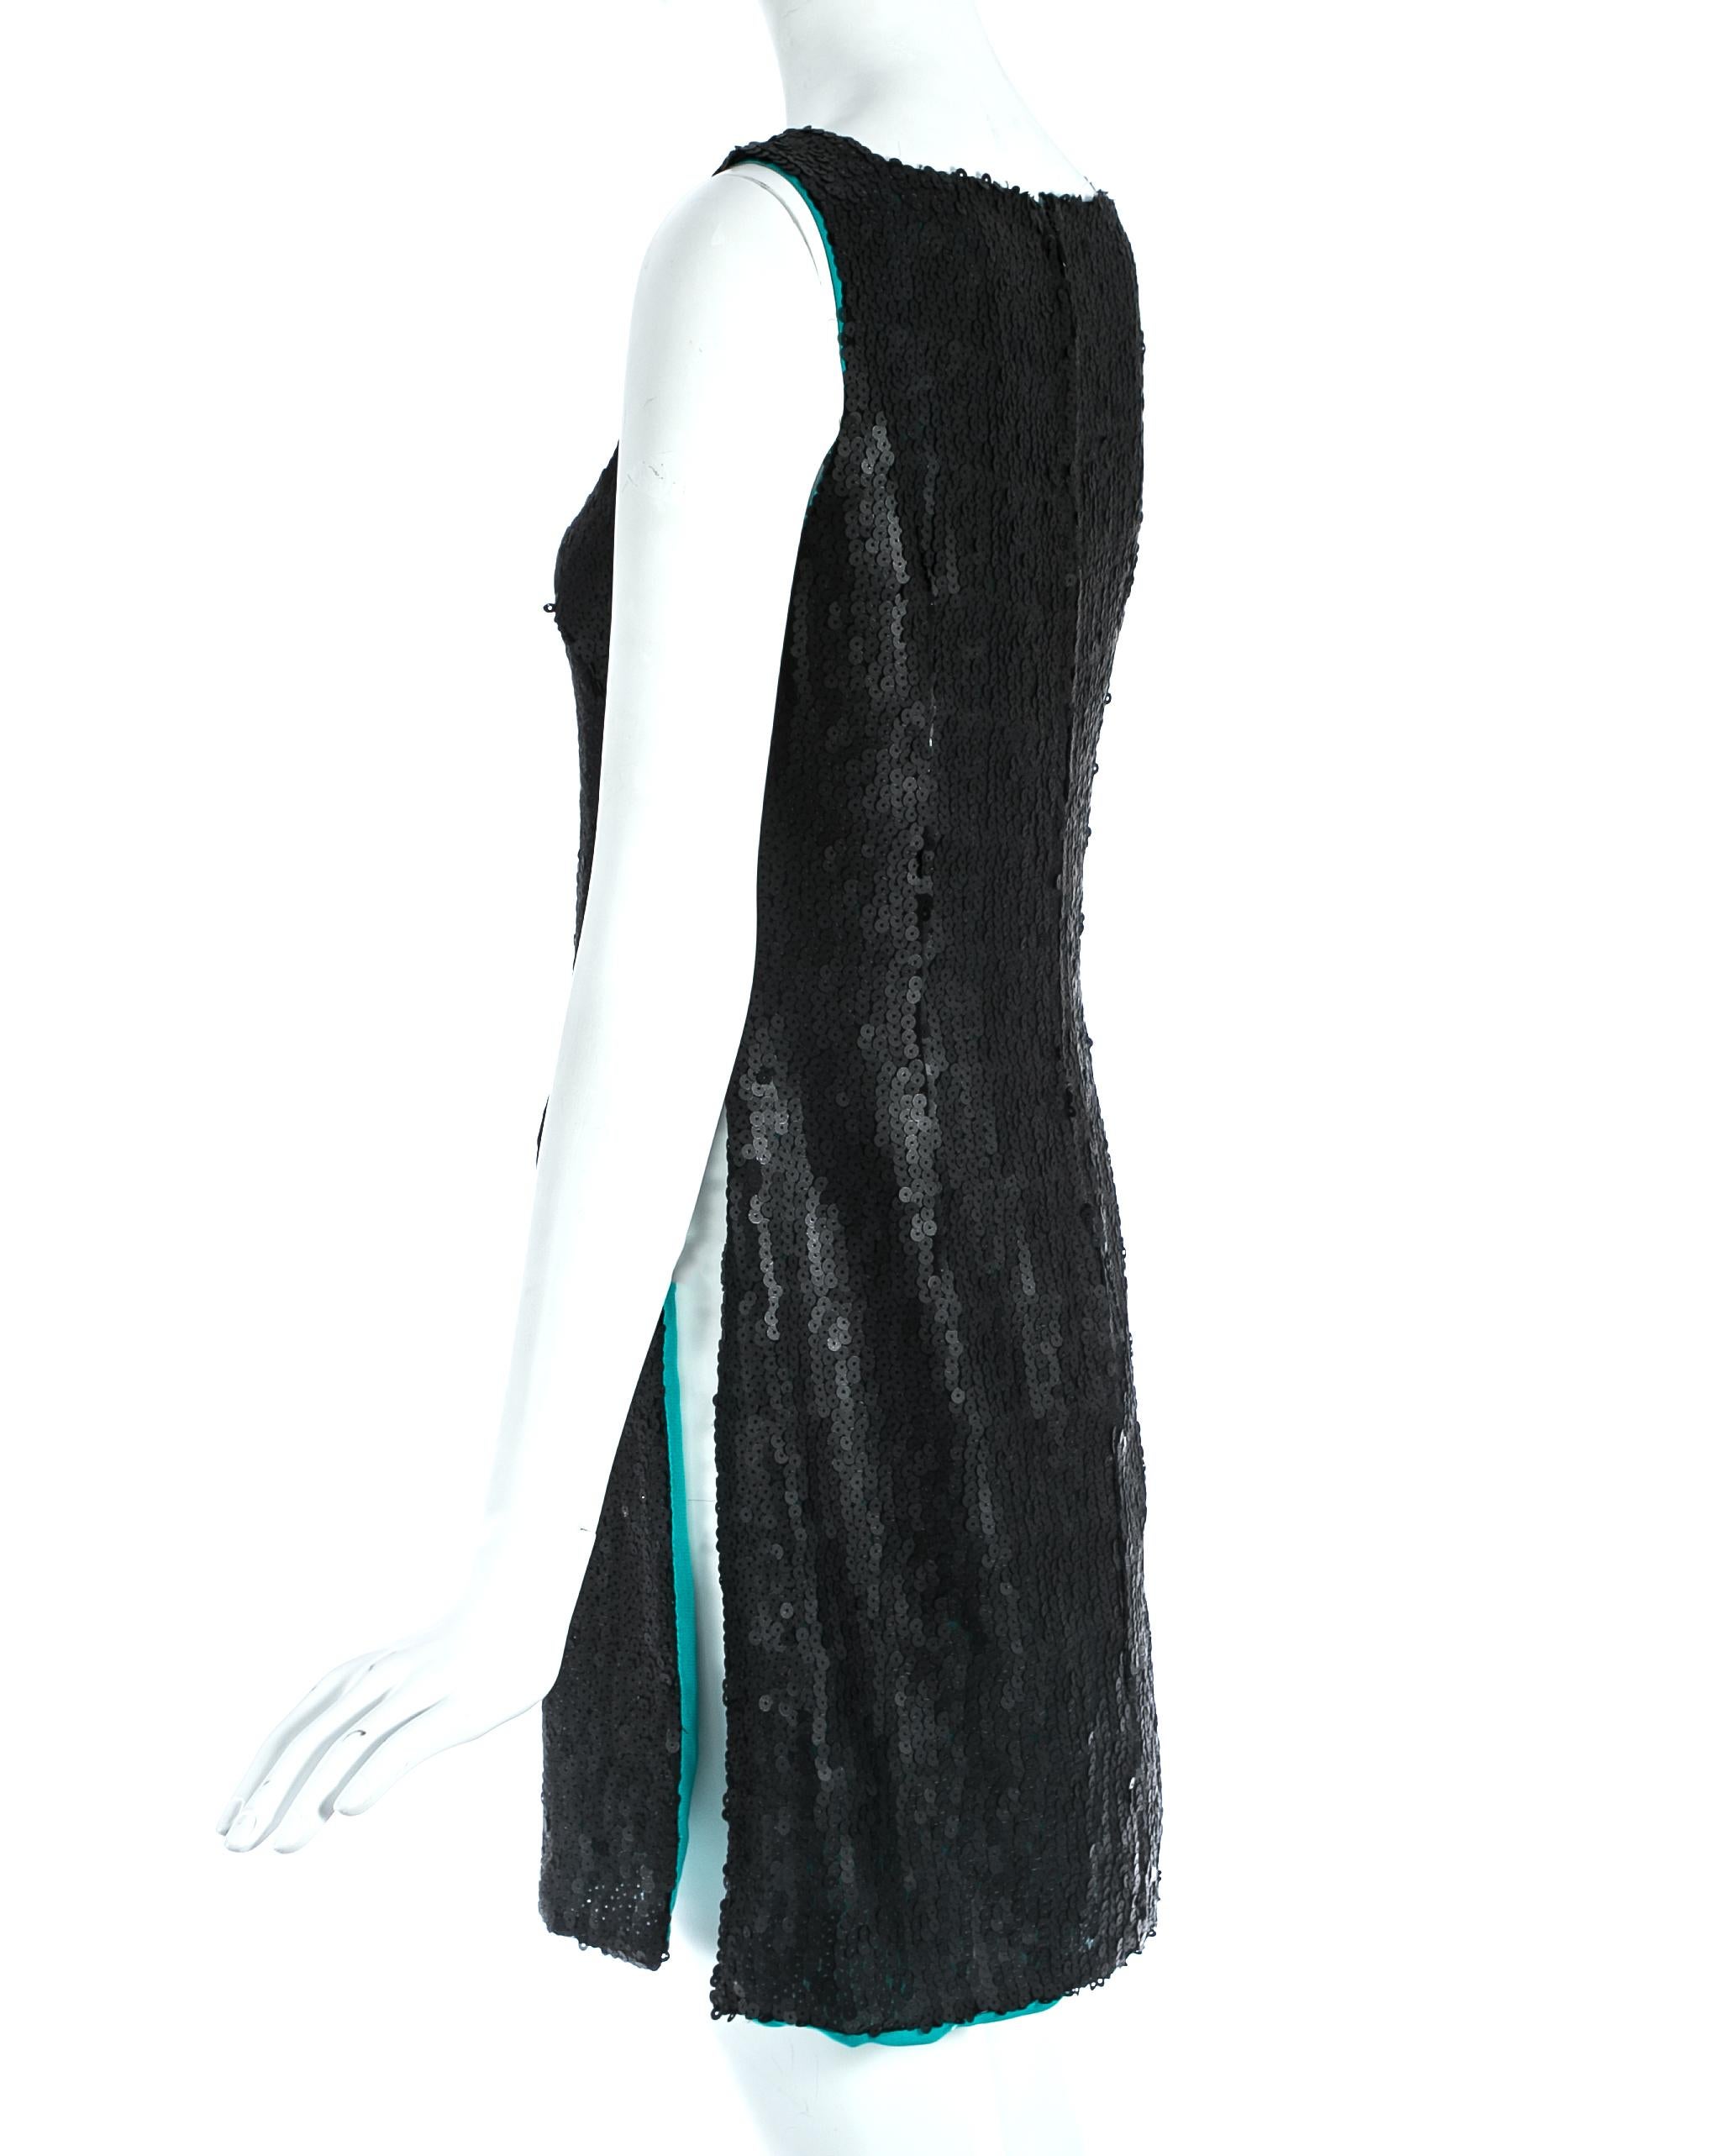 Black Gianni Versace black sequin mini dress / tunic with high side slits, A/W 1999 For Sale